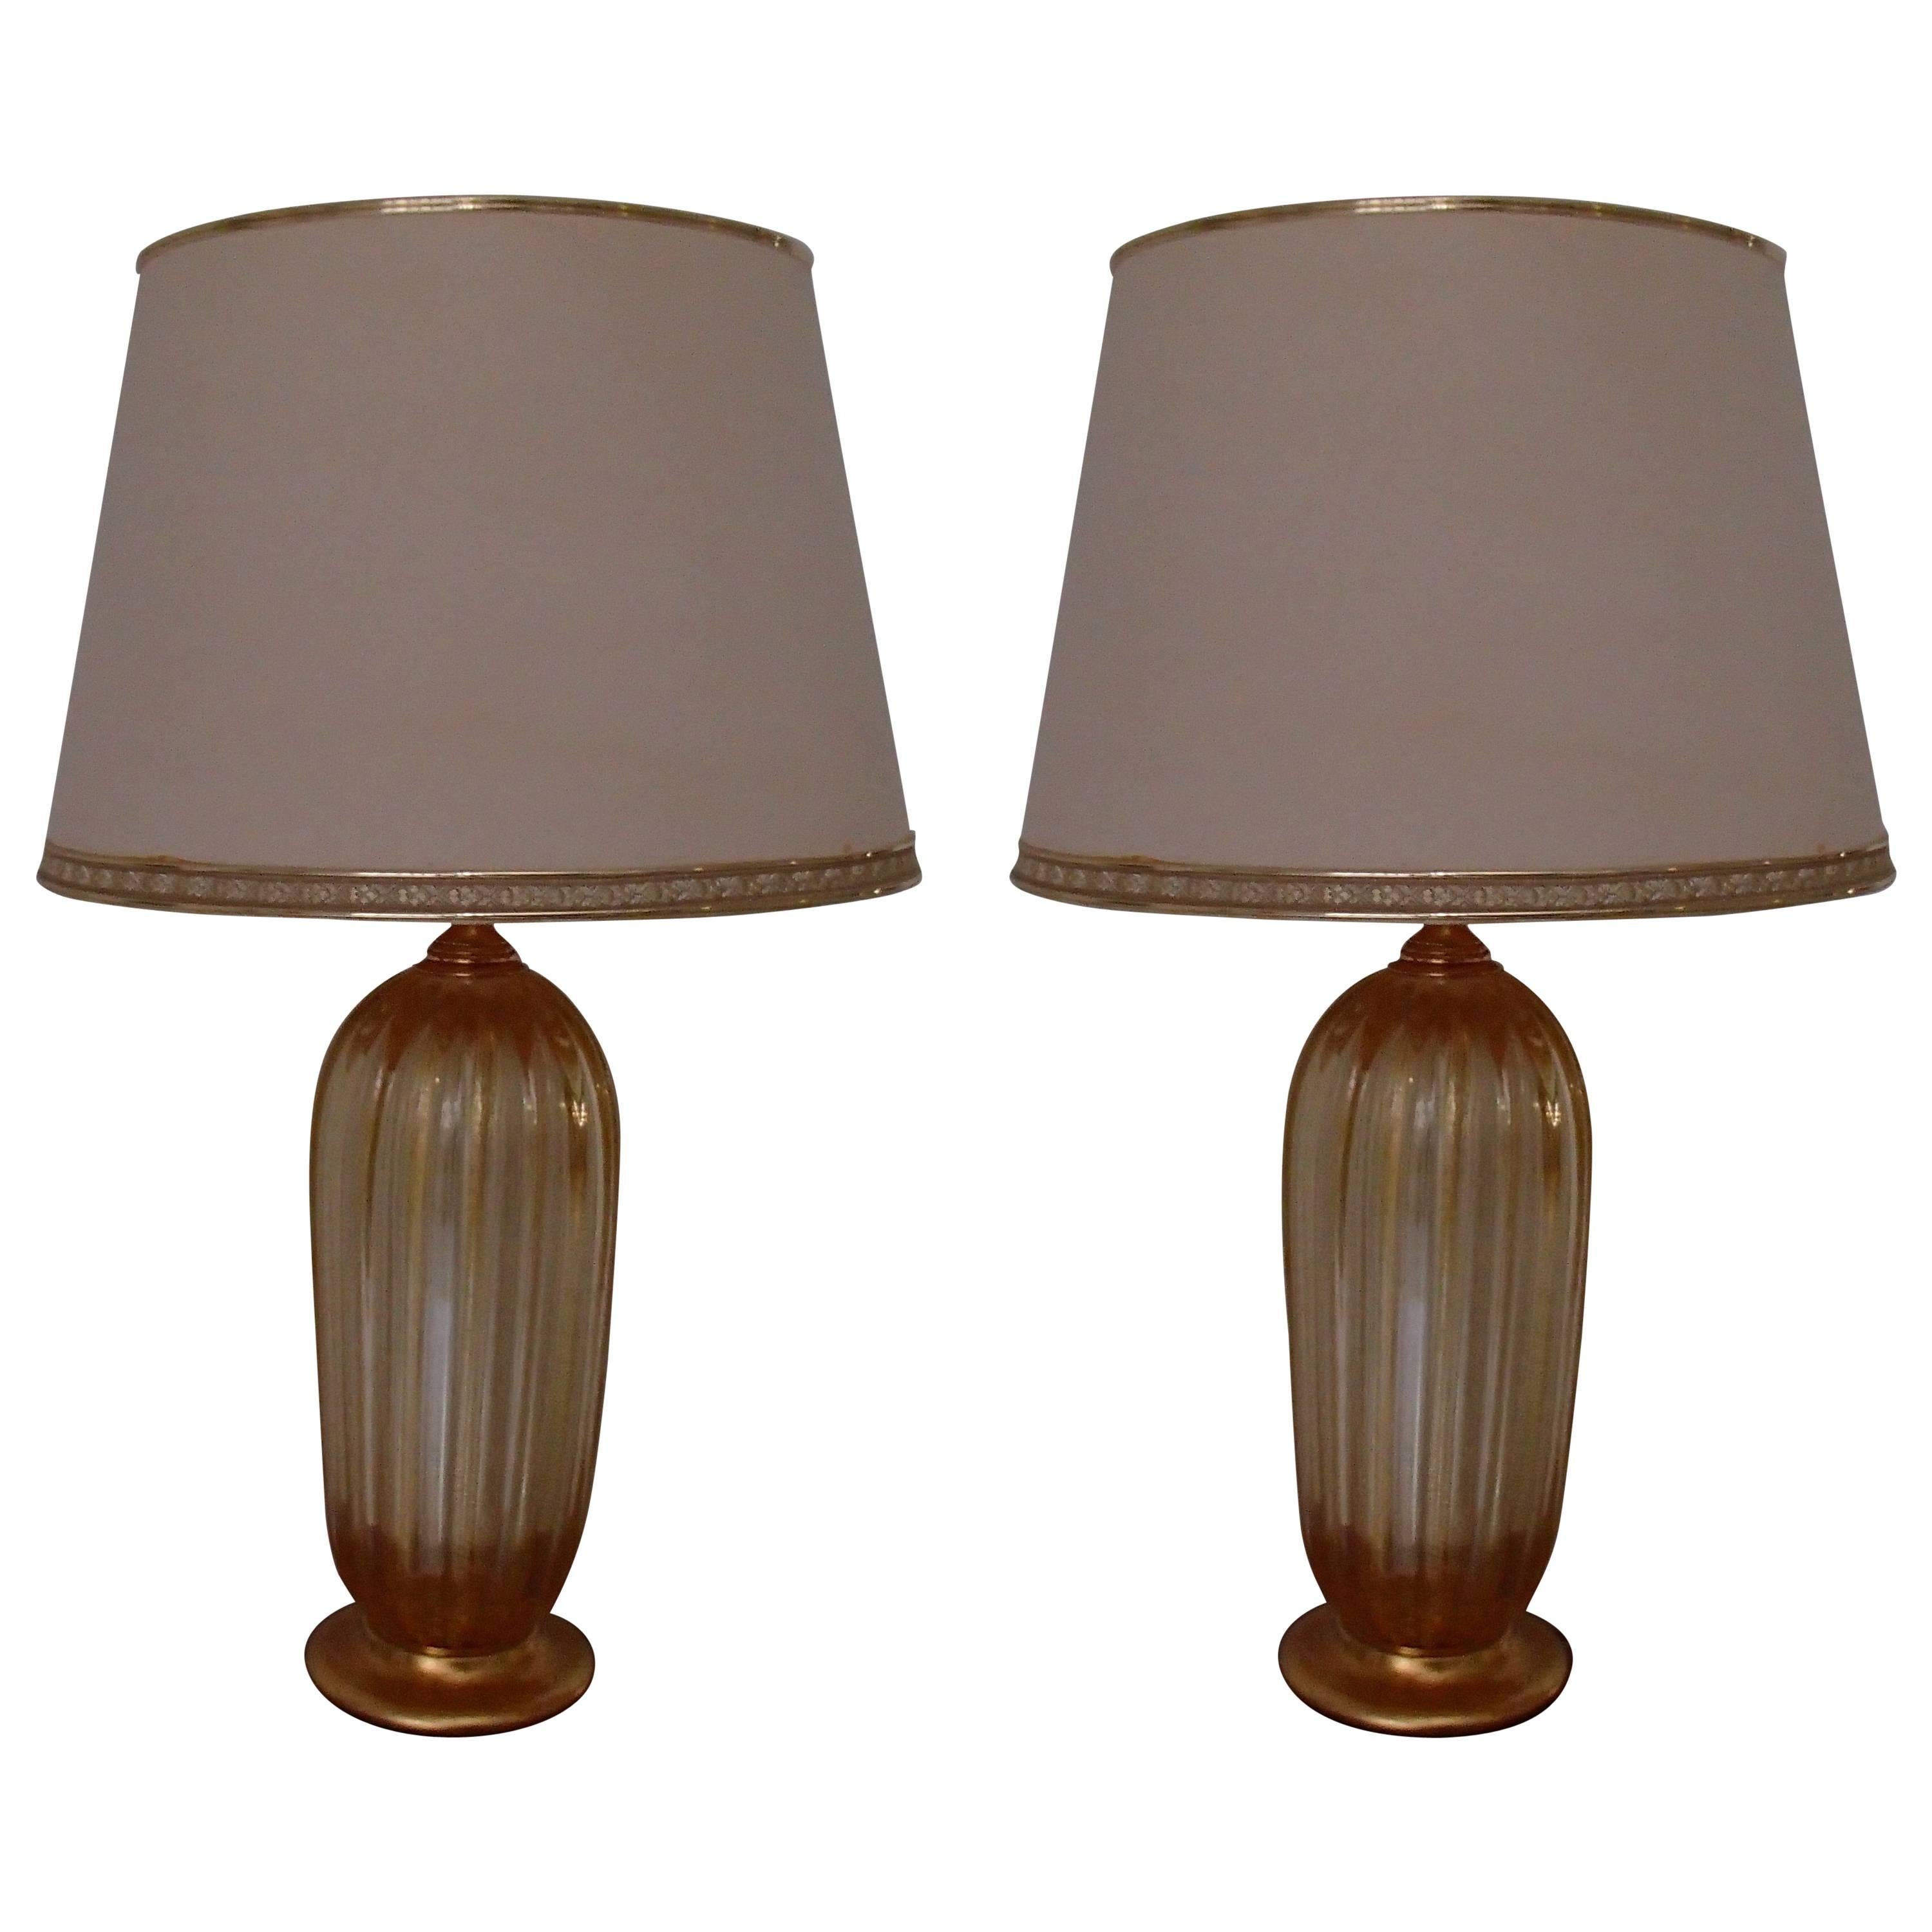 Pair of Tall Barovier e Toso Murano Table Lamps with Gold Inlays